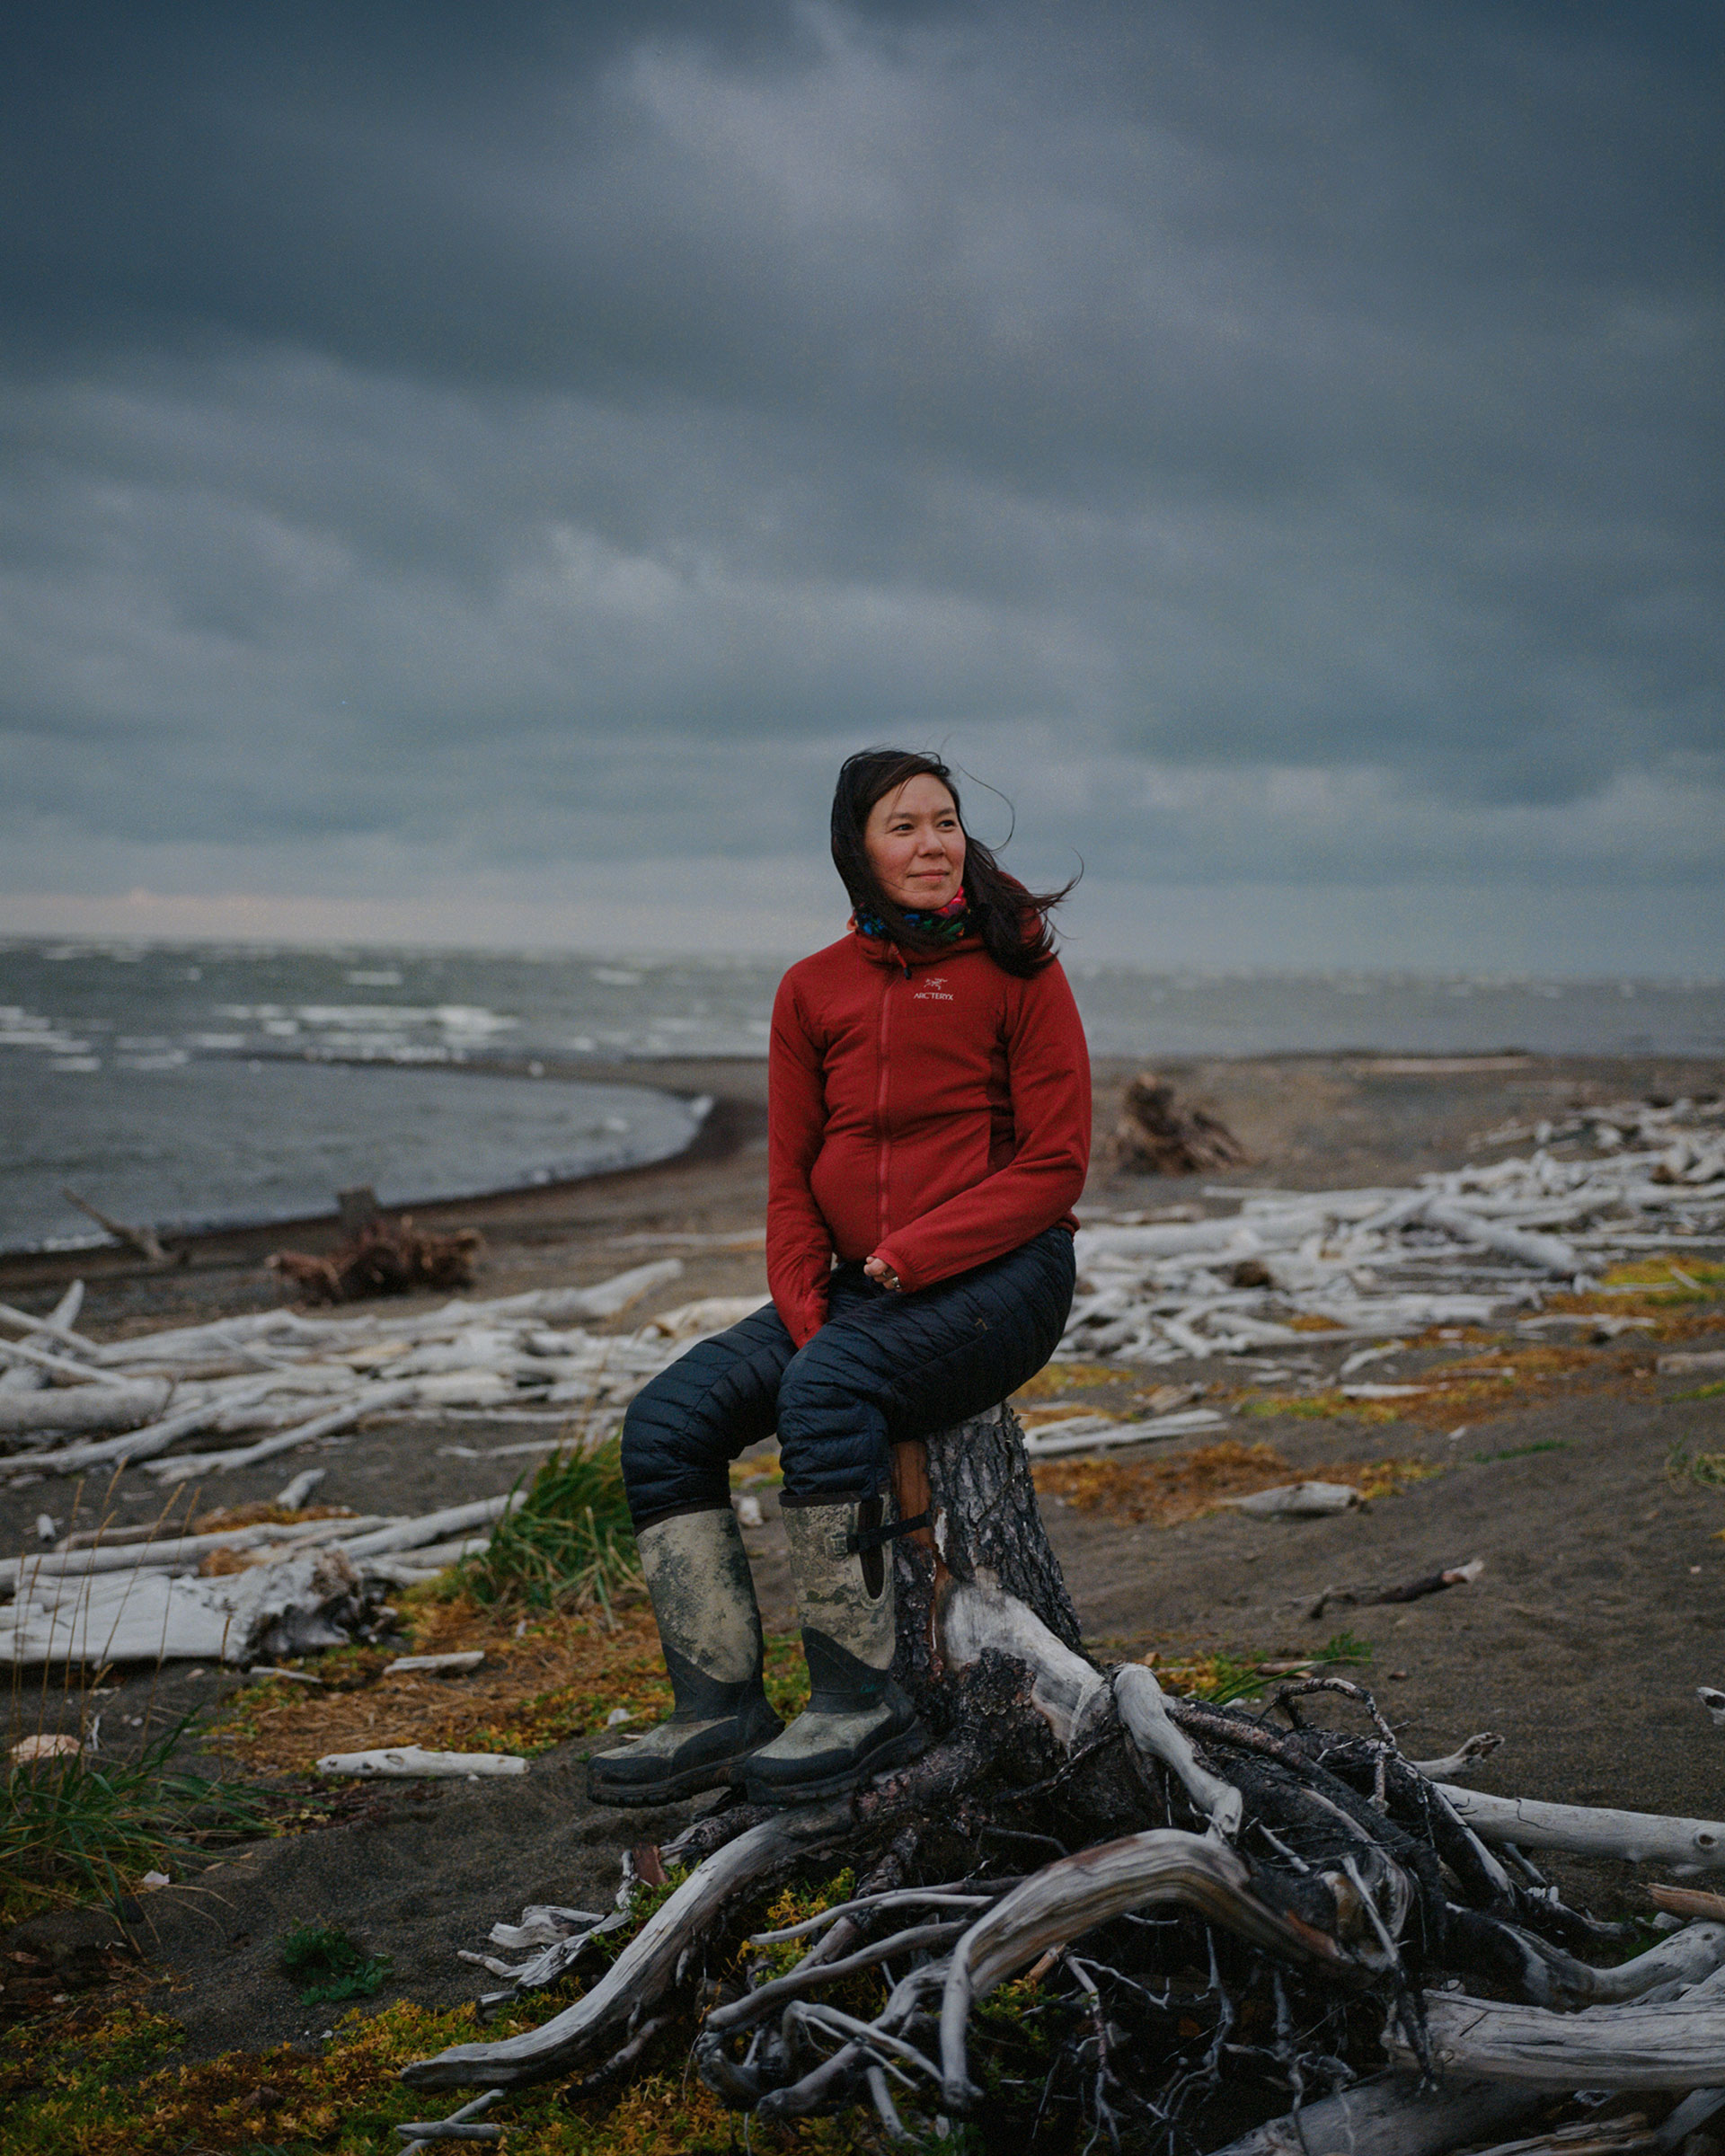 How the Melting Arctic Will Both Hurt and Help Alaskans